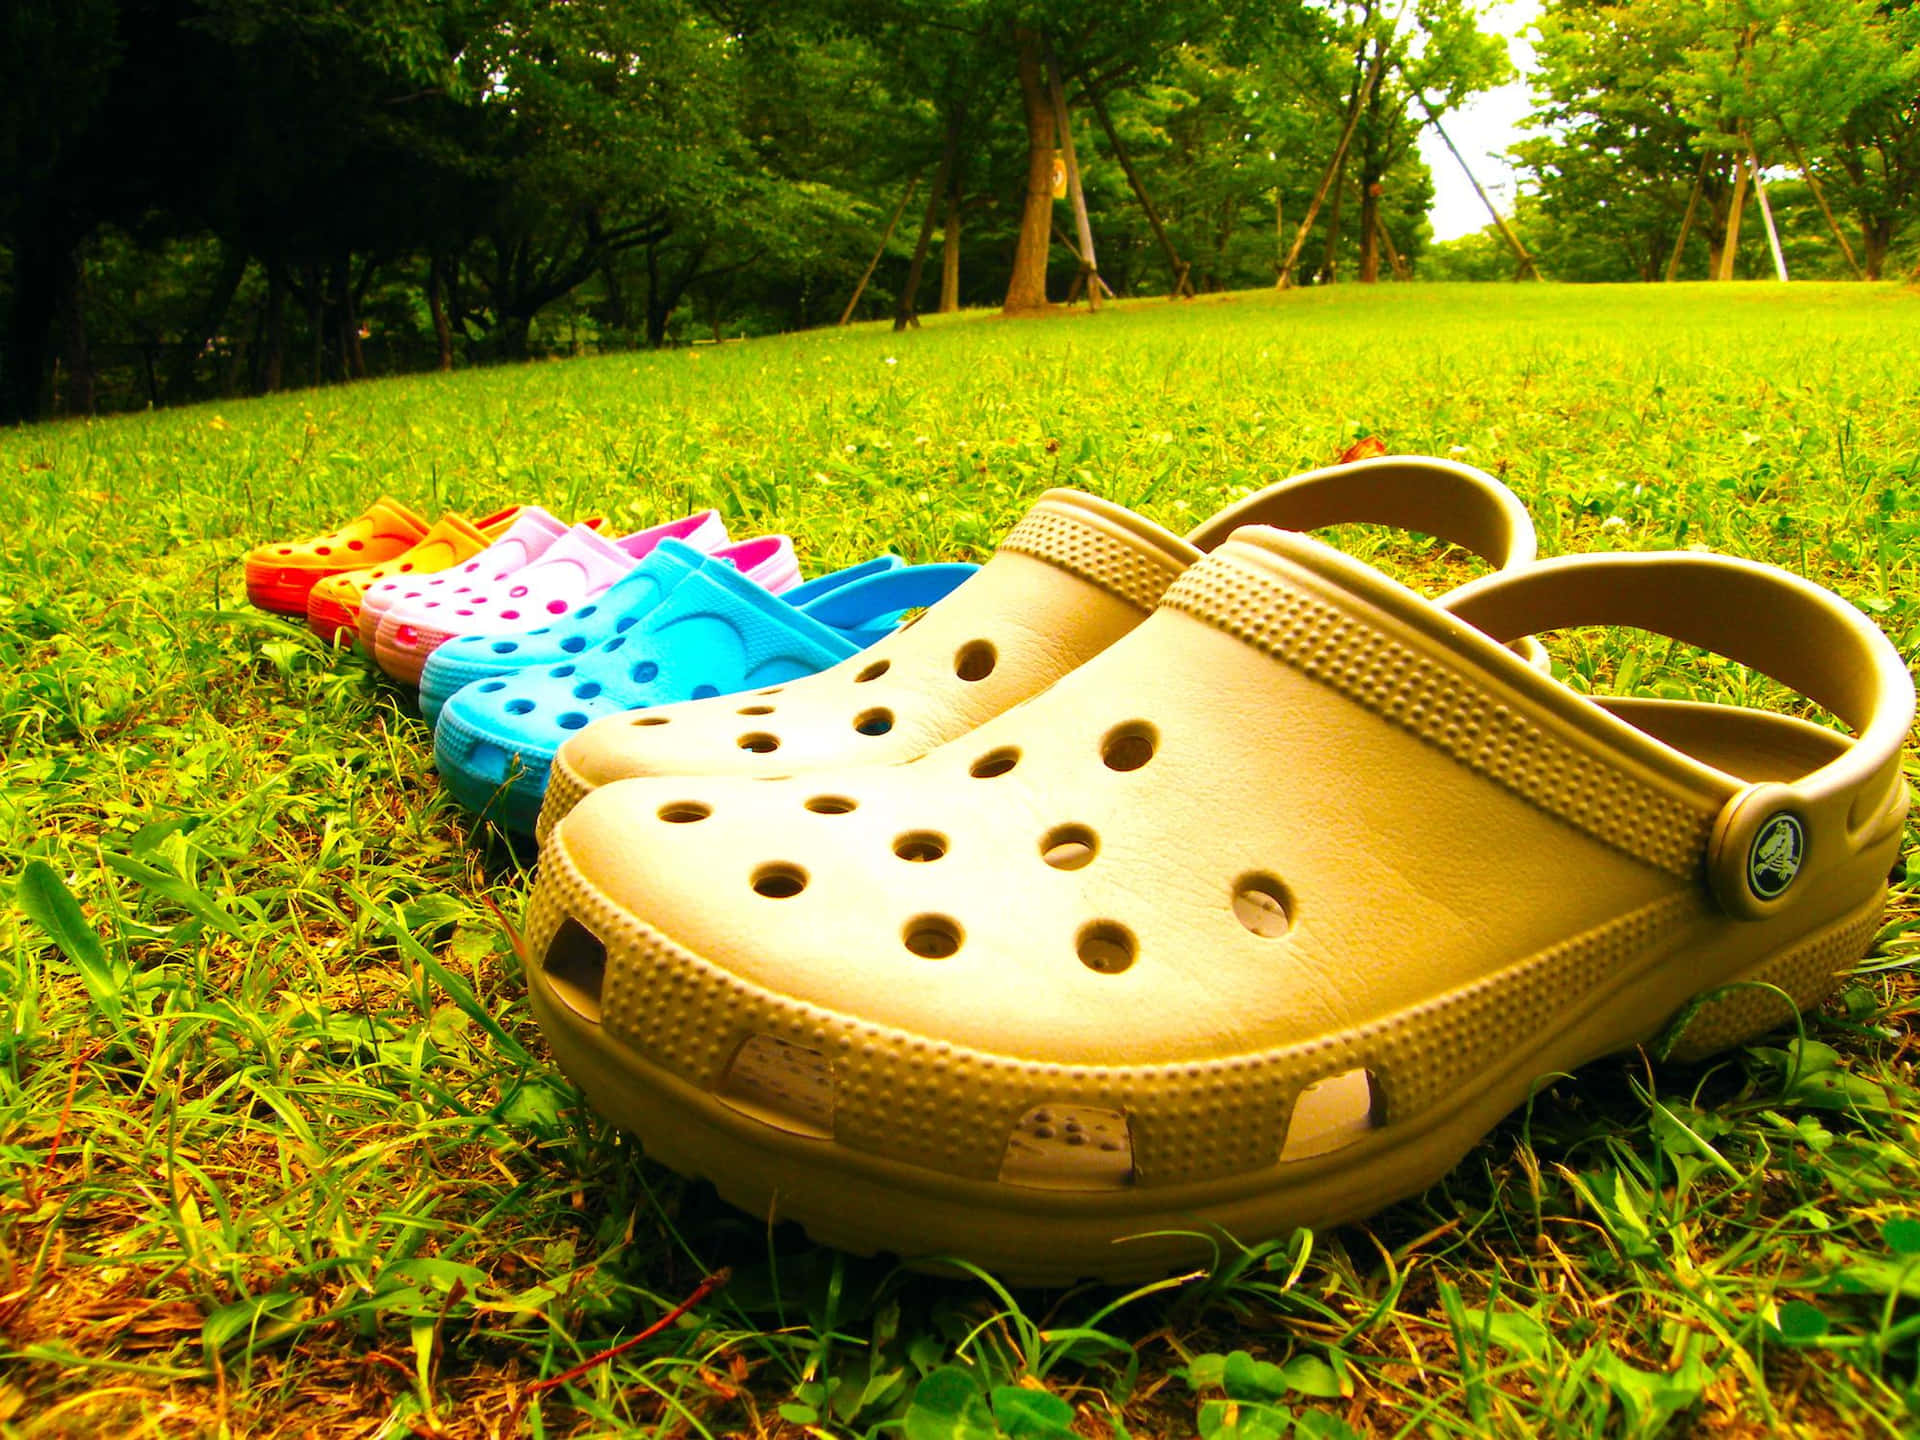 "Soft, comfortable and stylish - Crocs is the perfect shoe for any season"